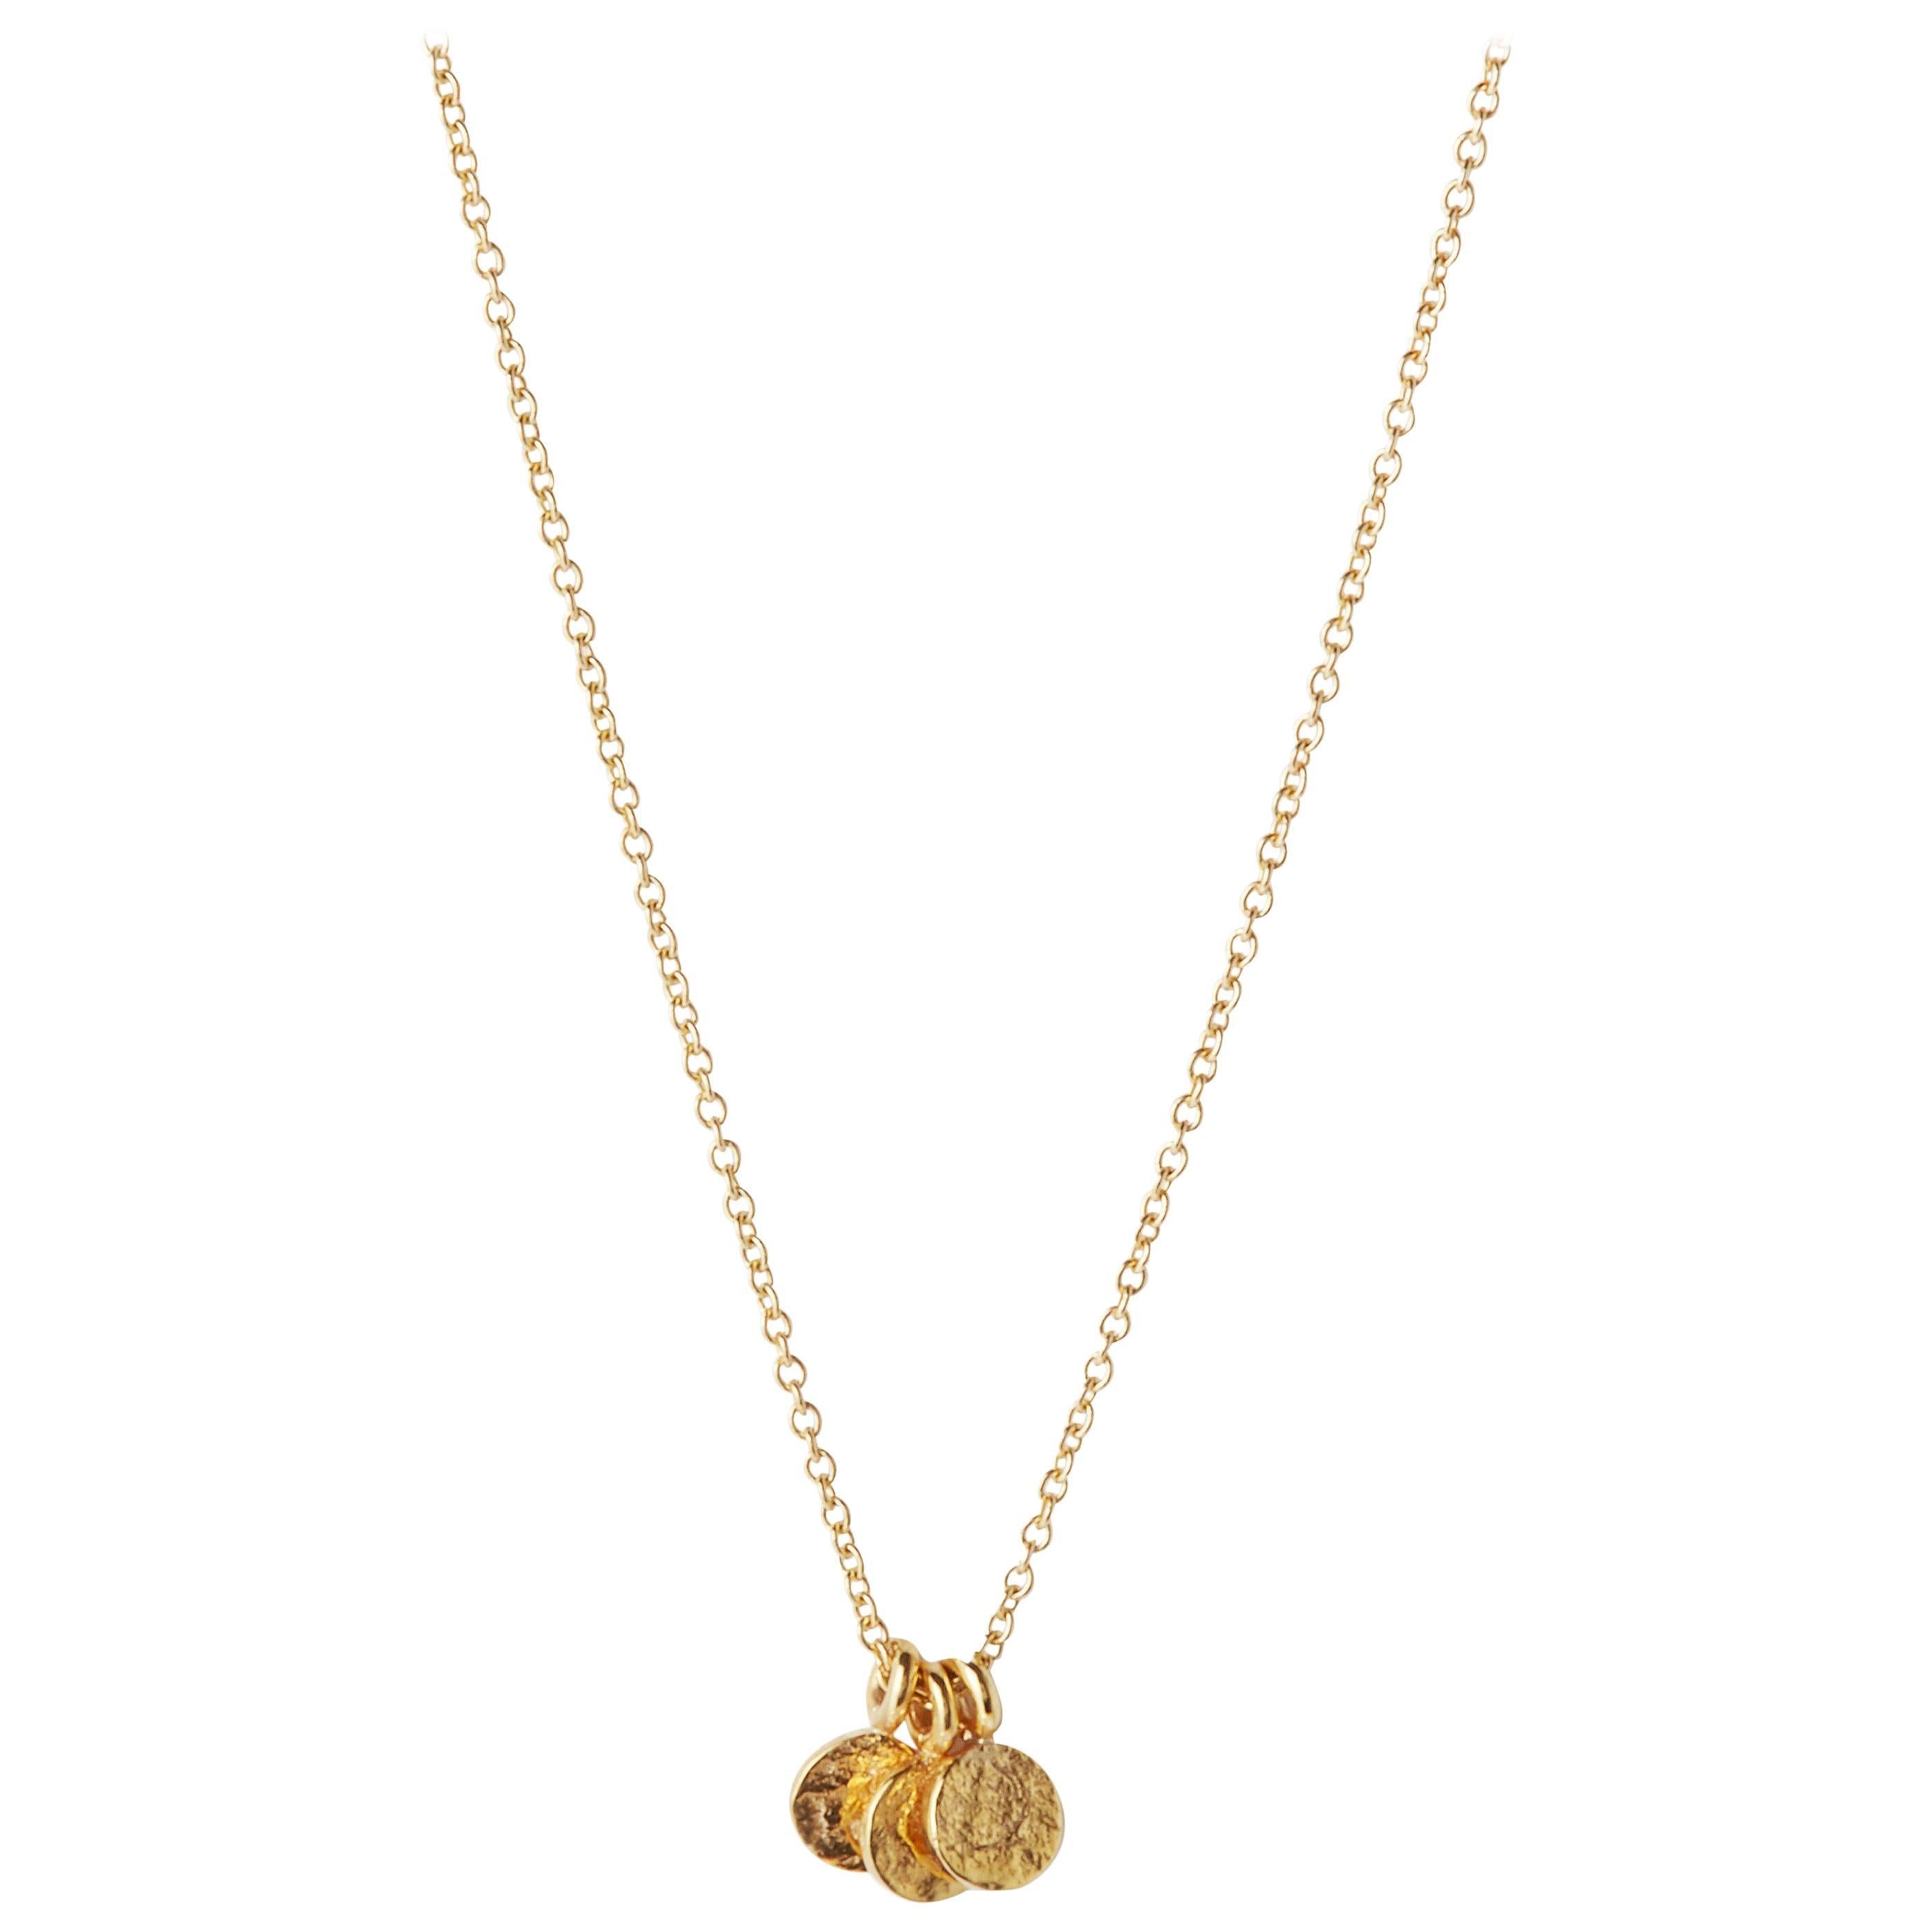 Trio Necklace in 18 Karat Yellow Gold by Allison Bryan For Sale